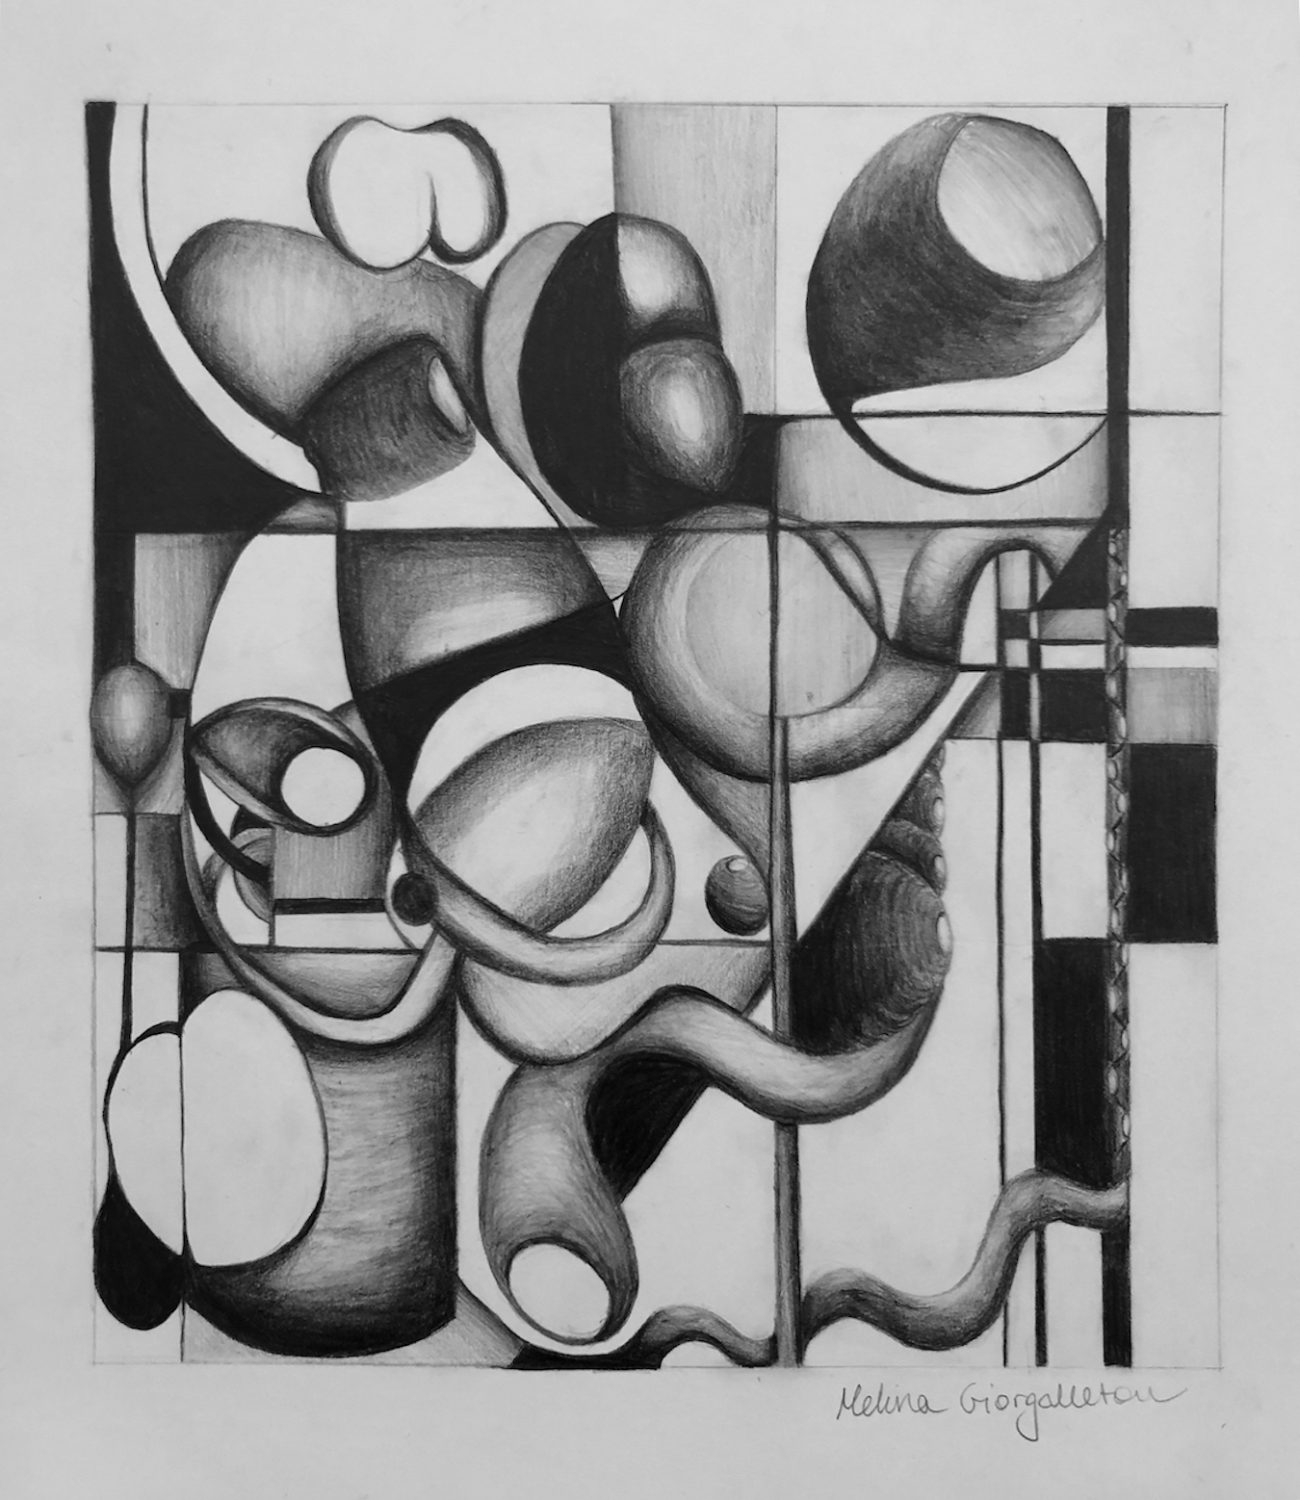 thumbnail of Abstract Value Study by Melina Giorgalletou. Medium: Graphite on bristol. Size 10 x 9 inches Date 2020